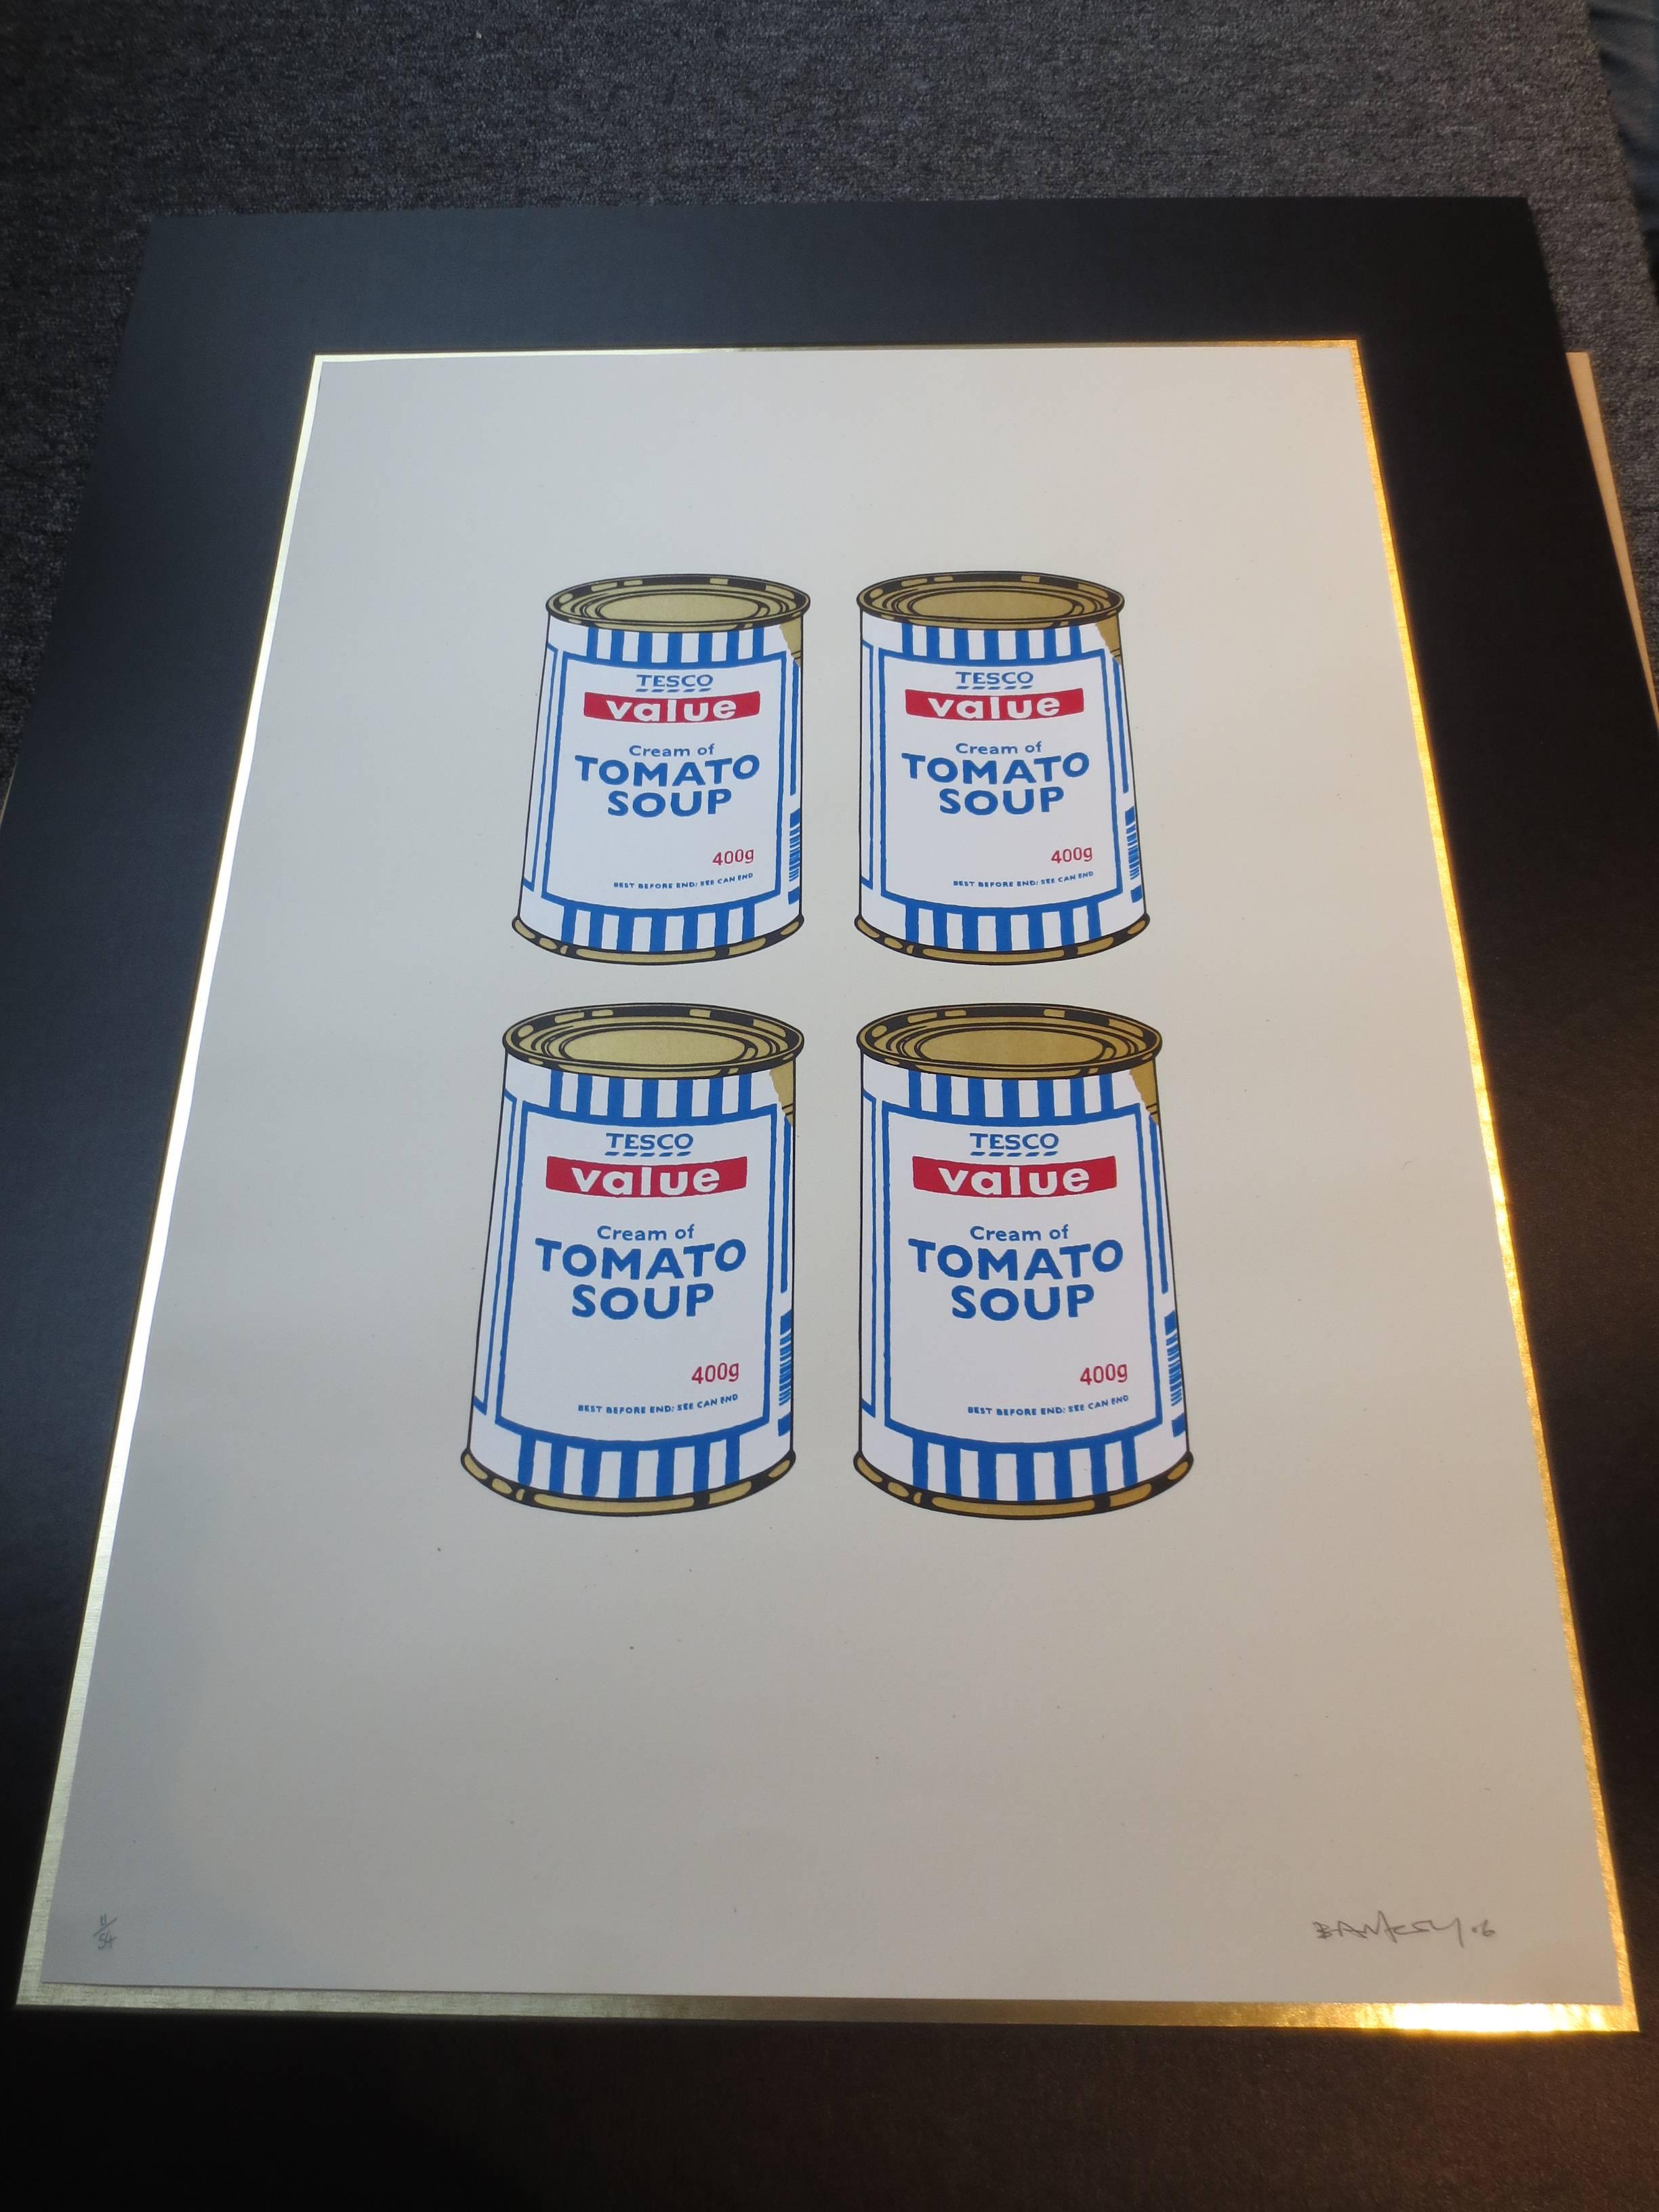 Four Soup Cans (Gold on Cream) - Print by Banksy